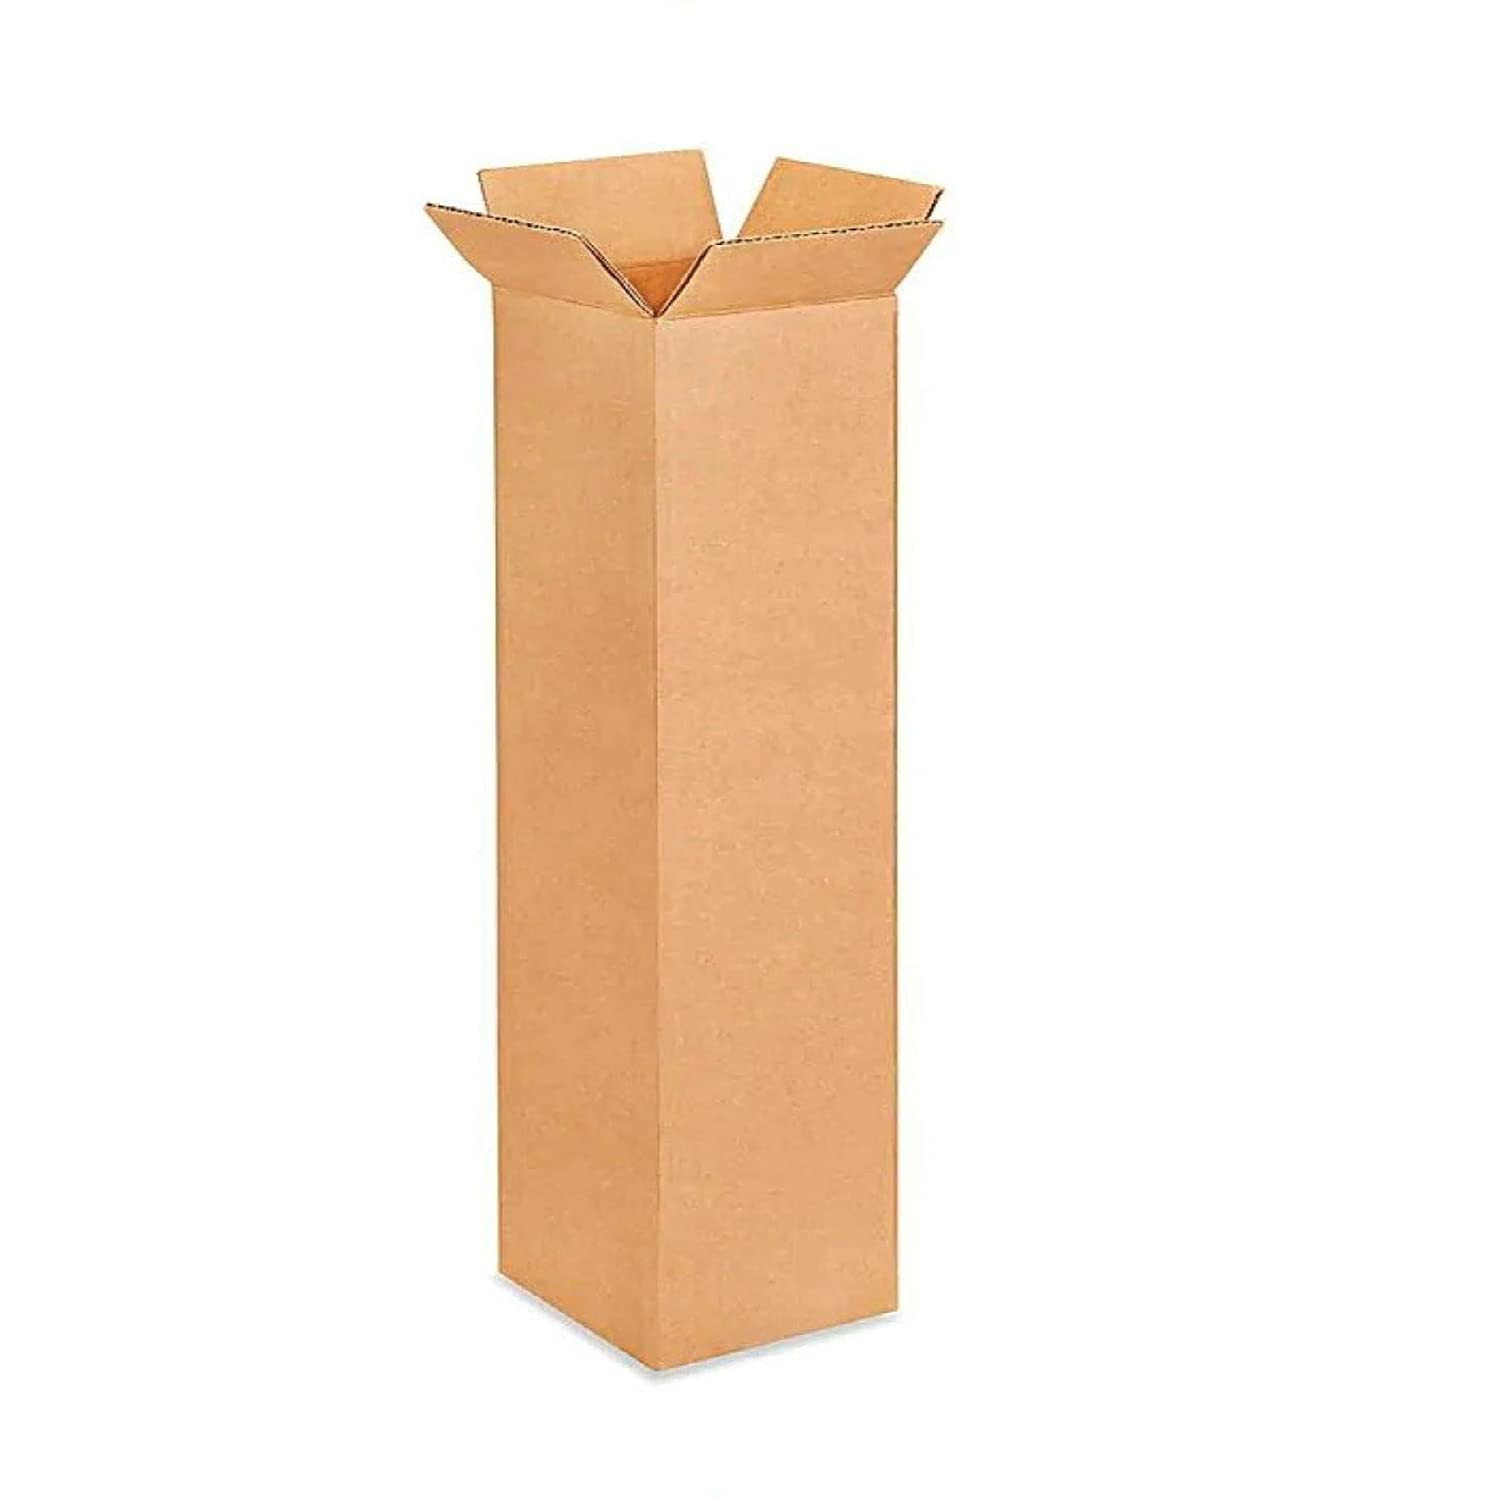 Boxes Fast Corrugated Cardboard Sheets, 36 x 60, Kraft, Pack of 5